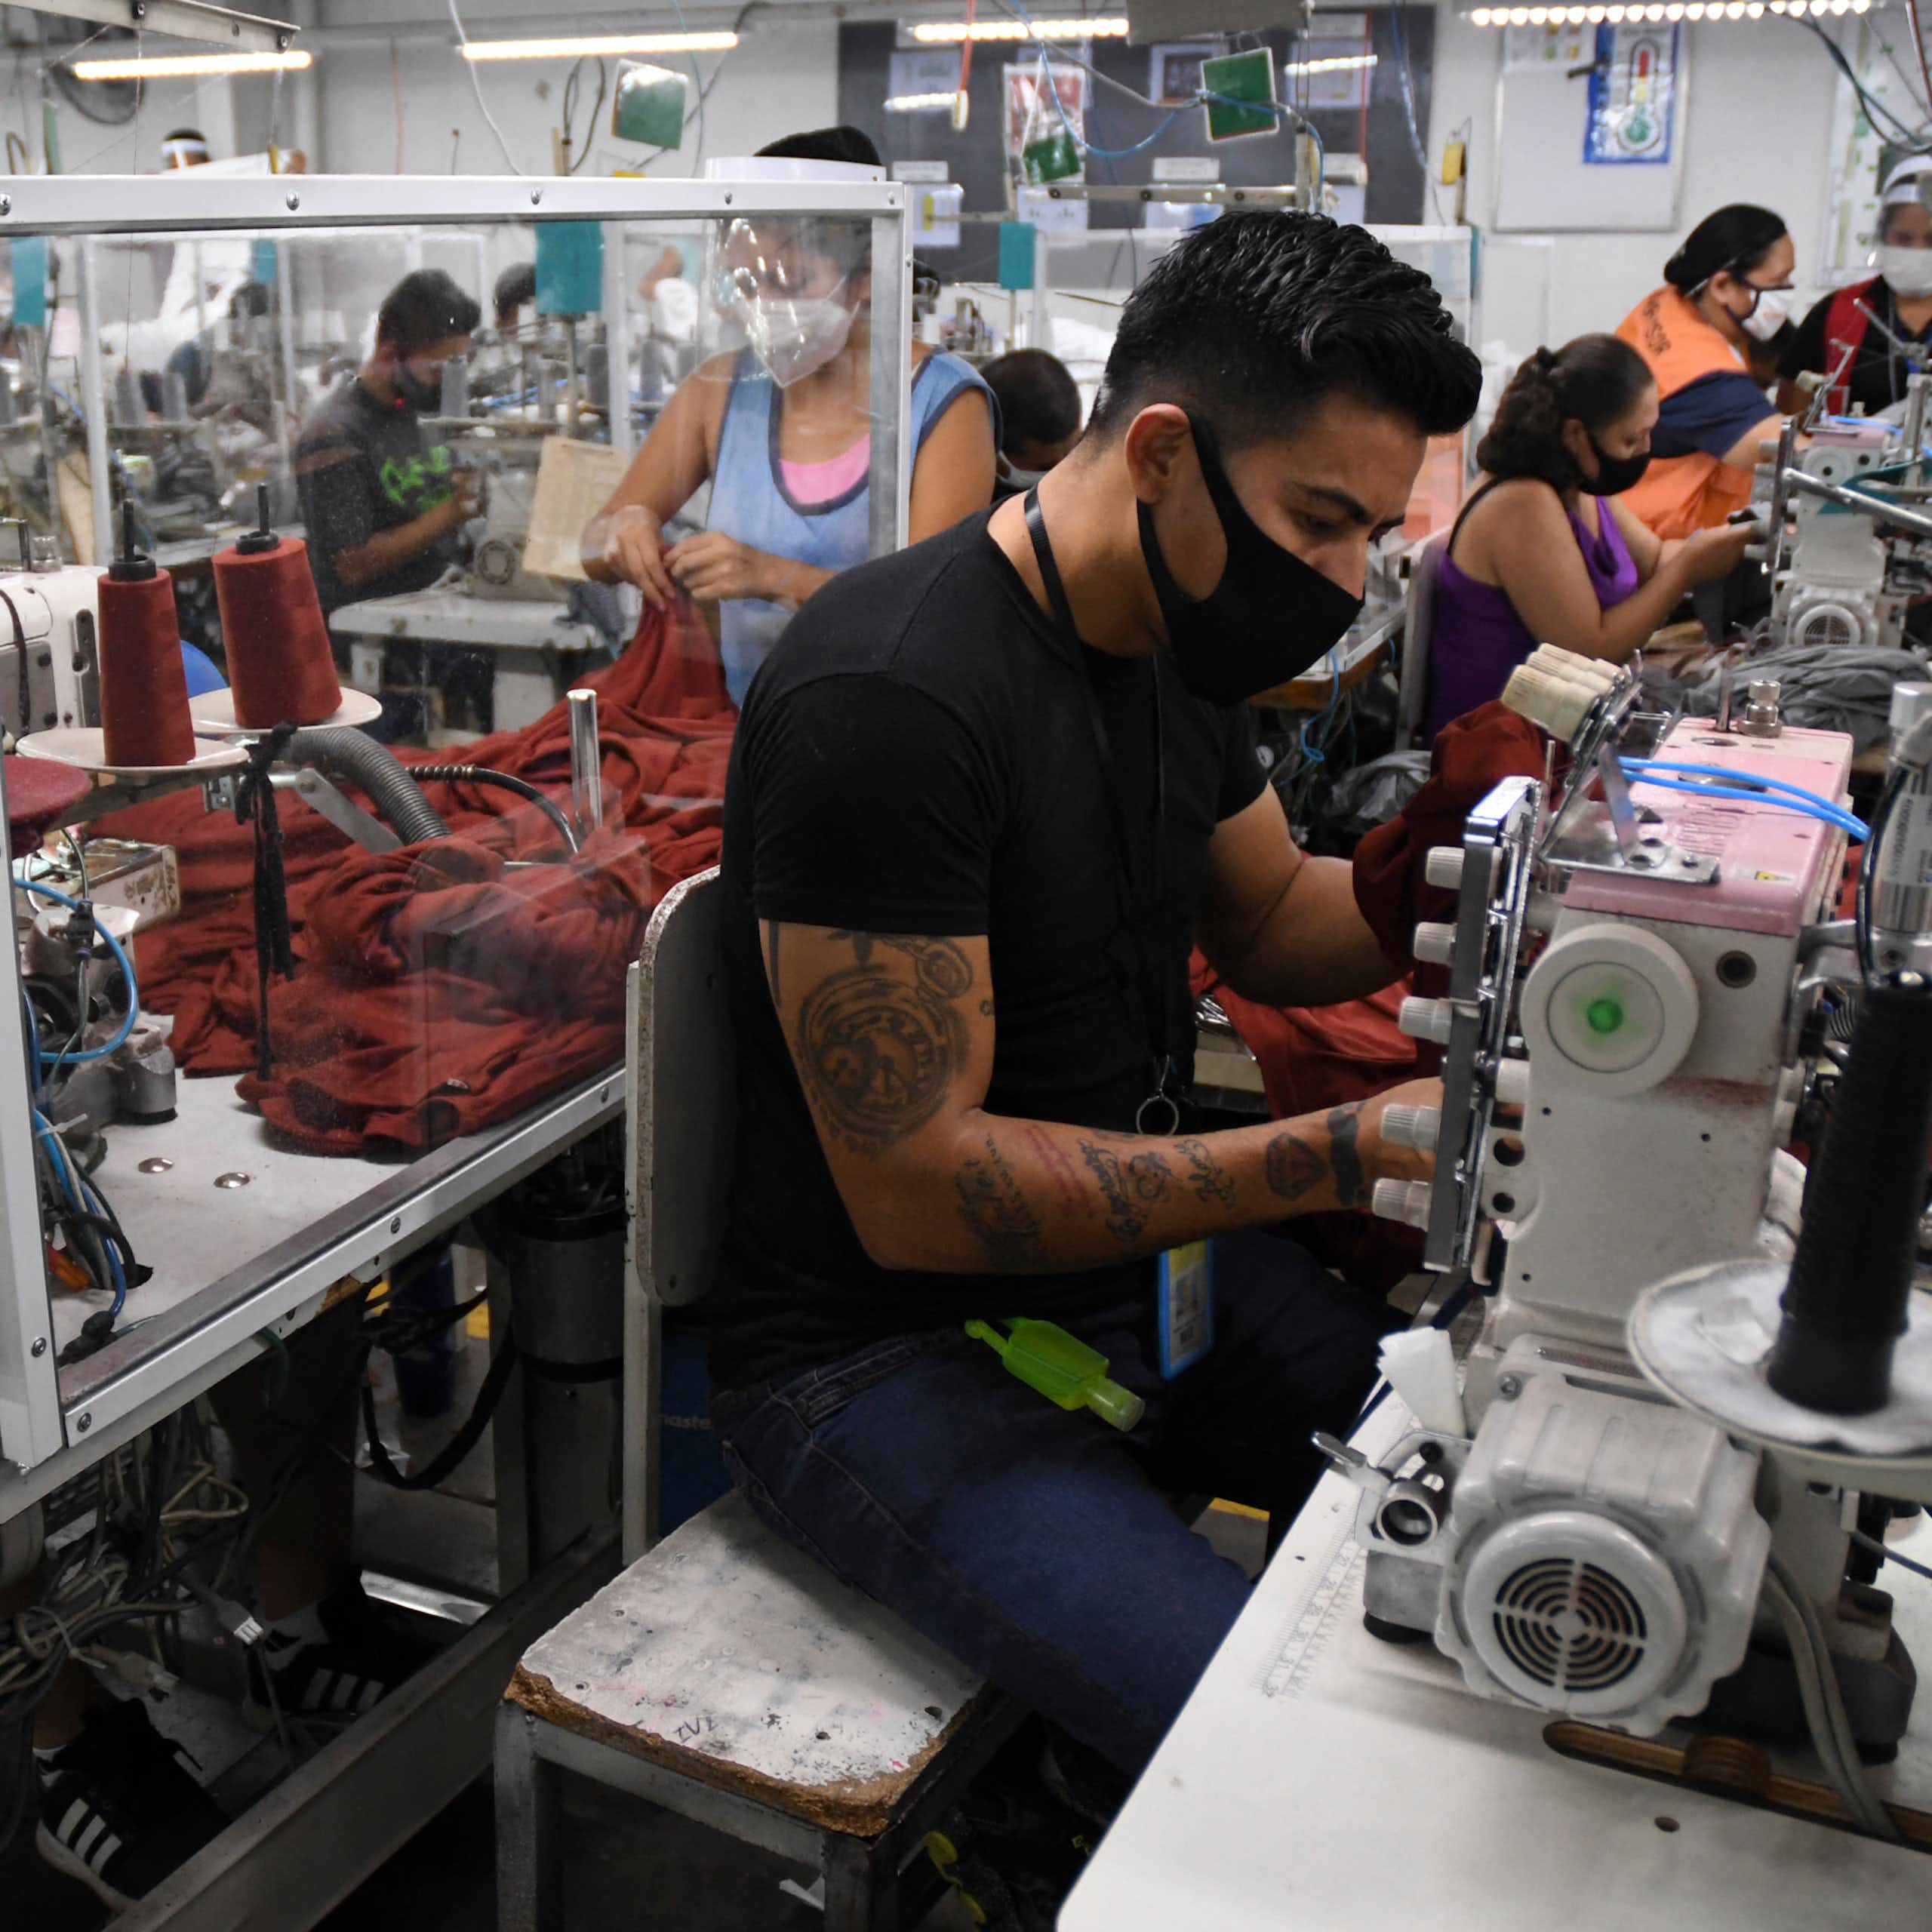 Workers in face masks sit next to sewing machines.